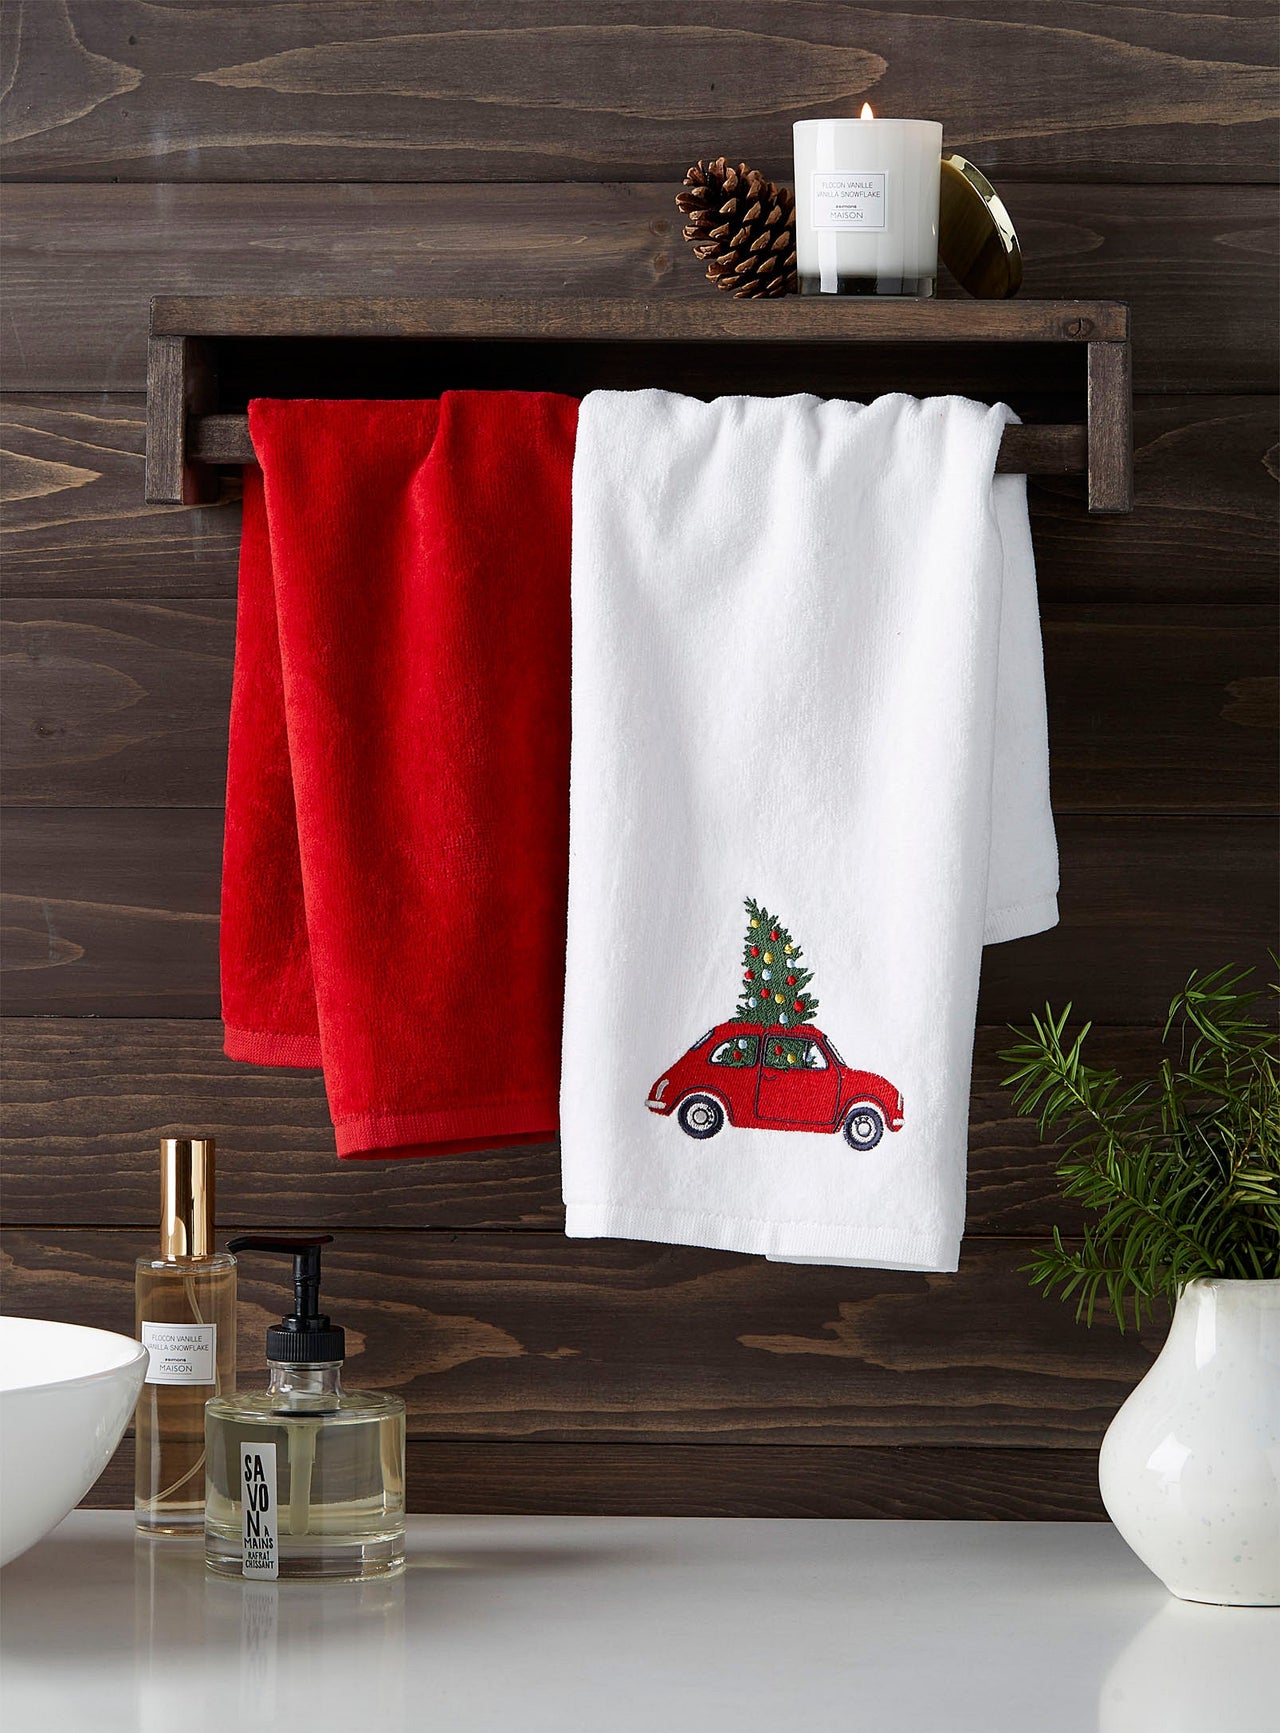 Bring home the tree hand towels